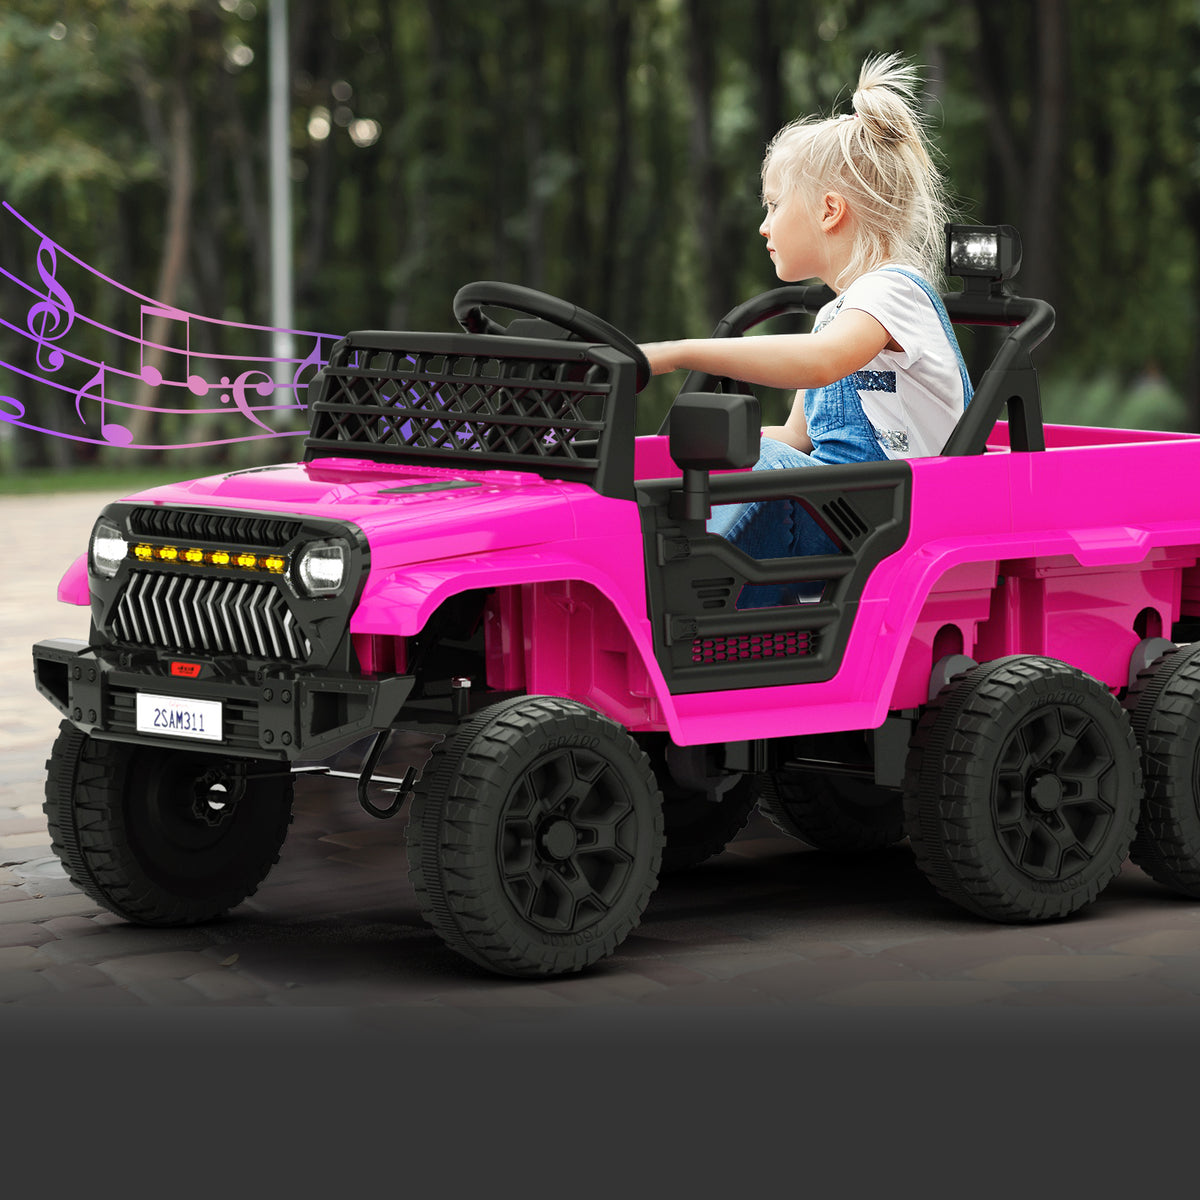 XJD 12V 7AH Ride On Truck Car with Remote Control, 6 Wheels, 2 Seats, Power Car for Kids